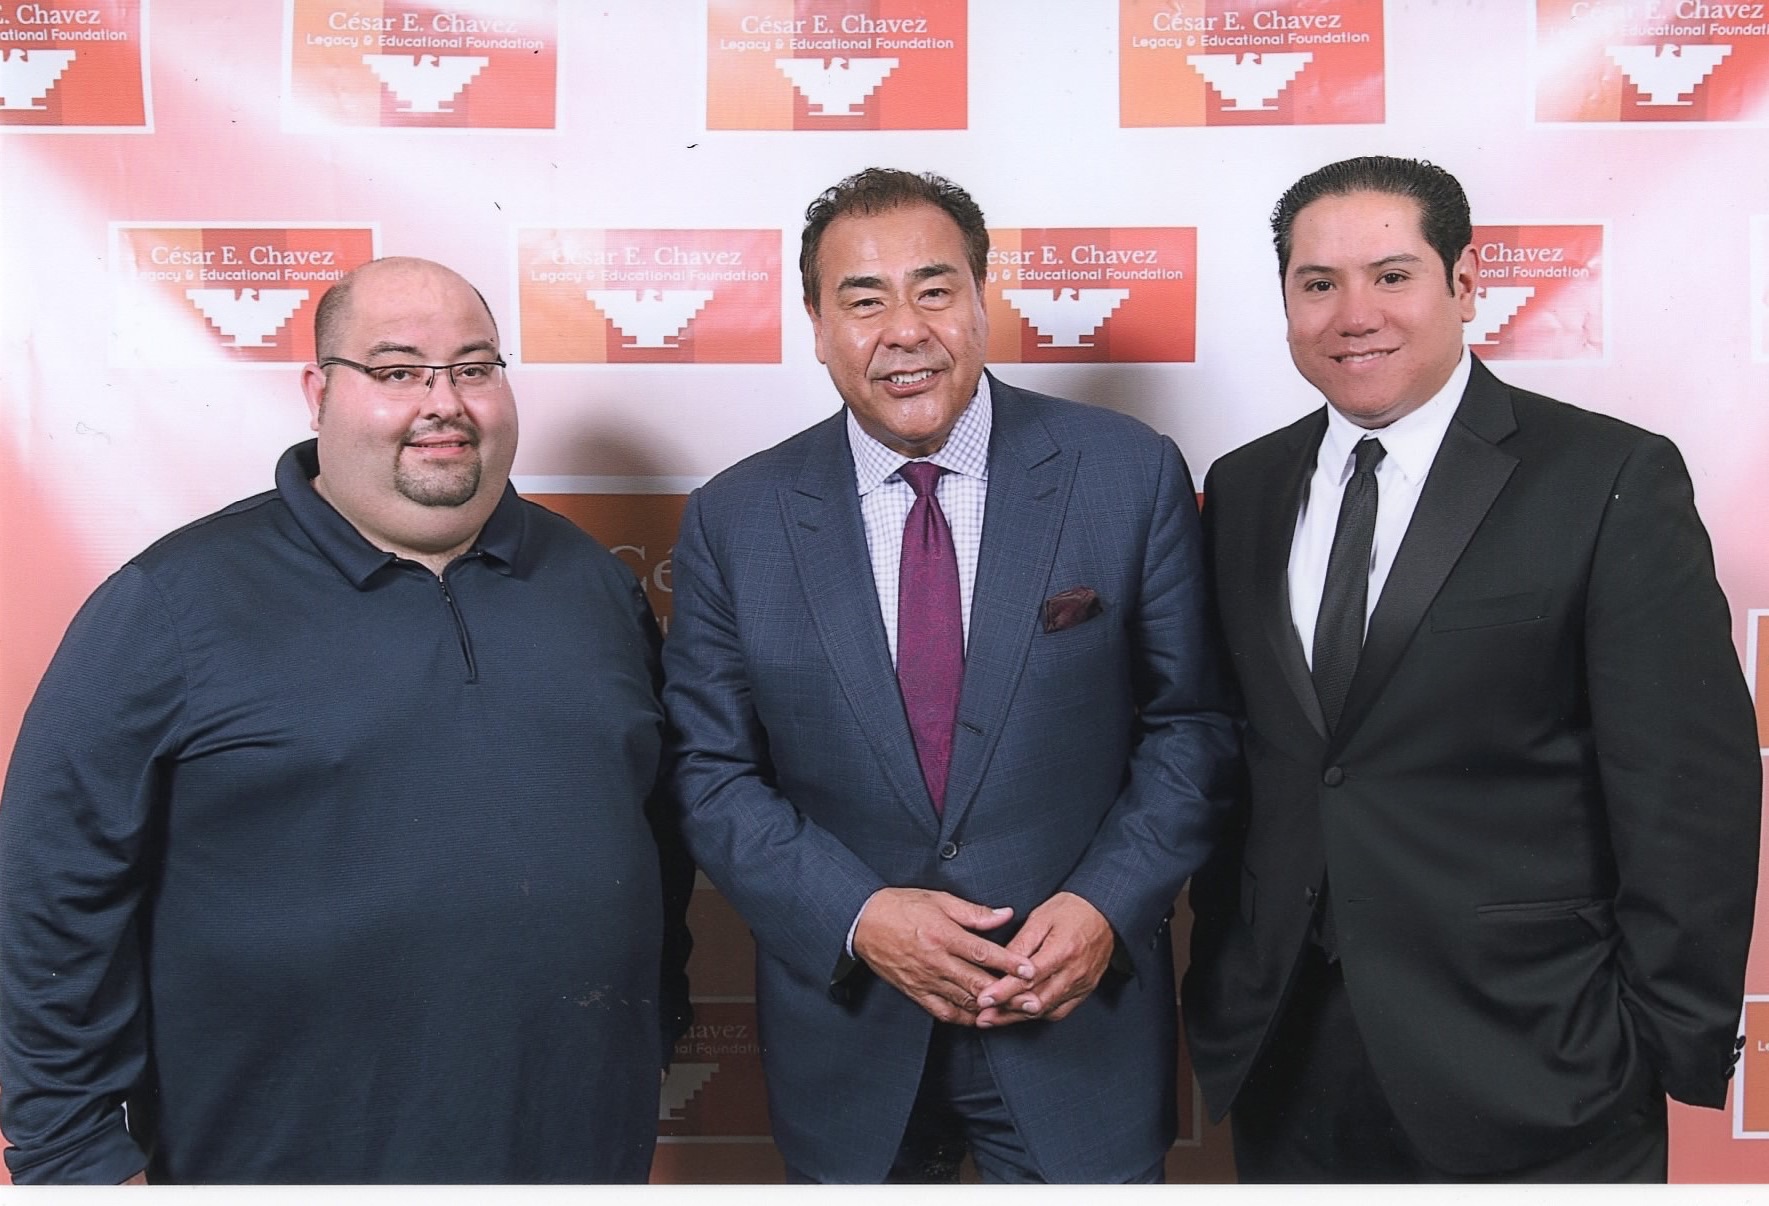 Cesar E. Chavez Legacy and Educational Foundation Gala with John Quinones.